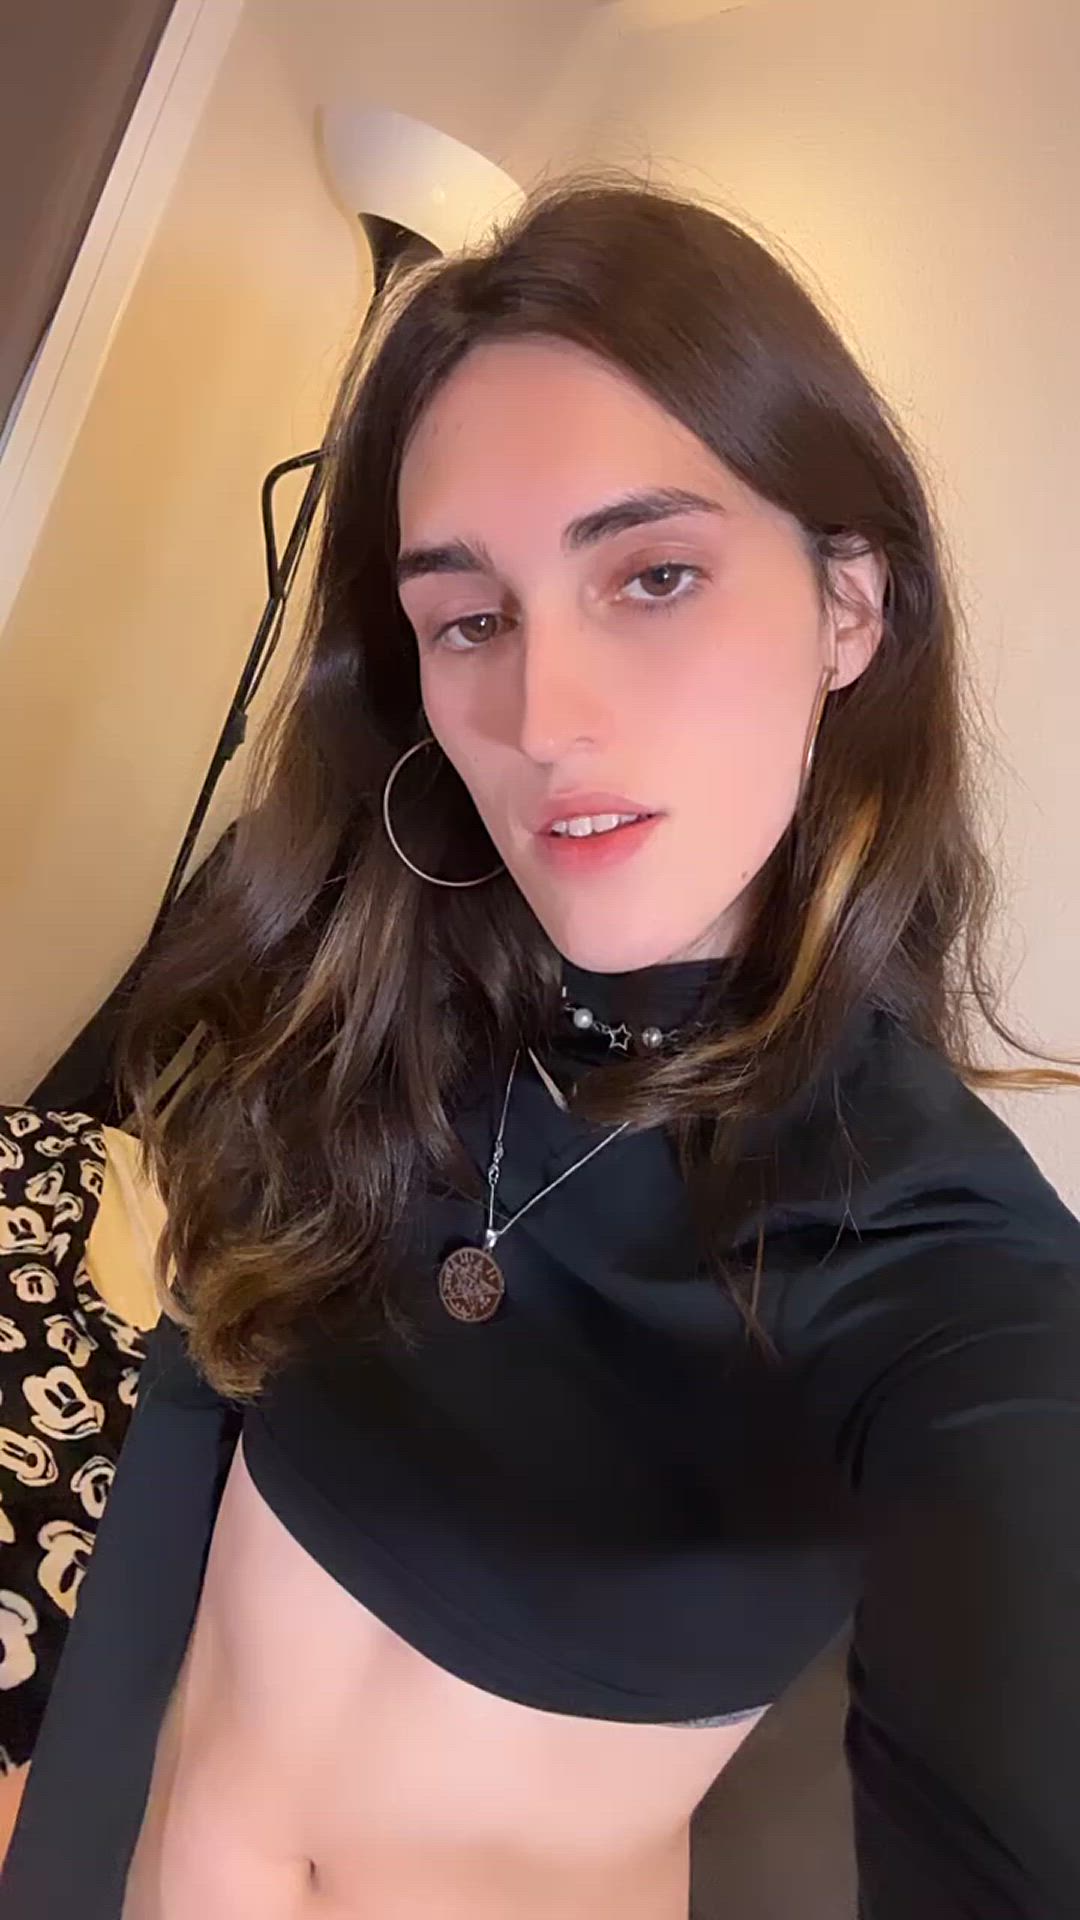 Teen porn video with onlyfans model Alune 🏳️‍⚧️ <strong>@alune.uwu</strong>